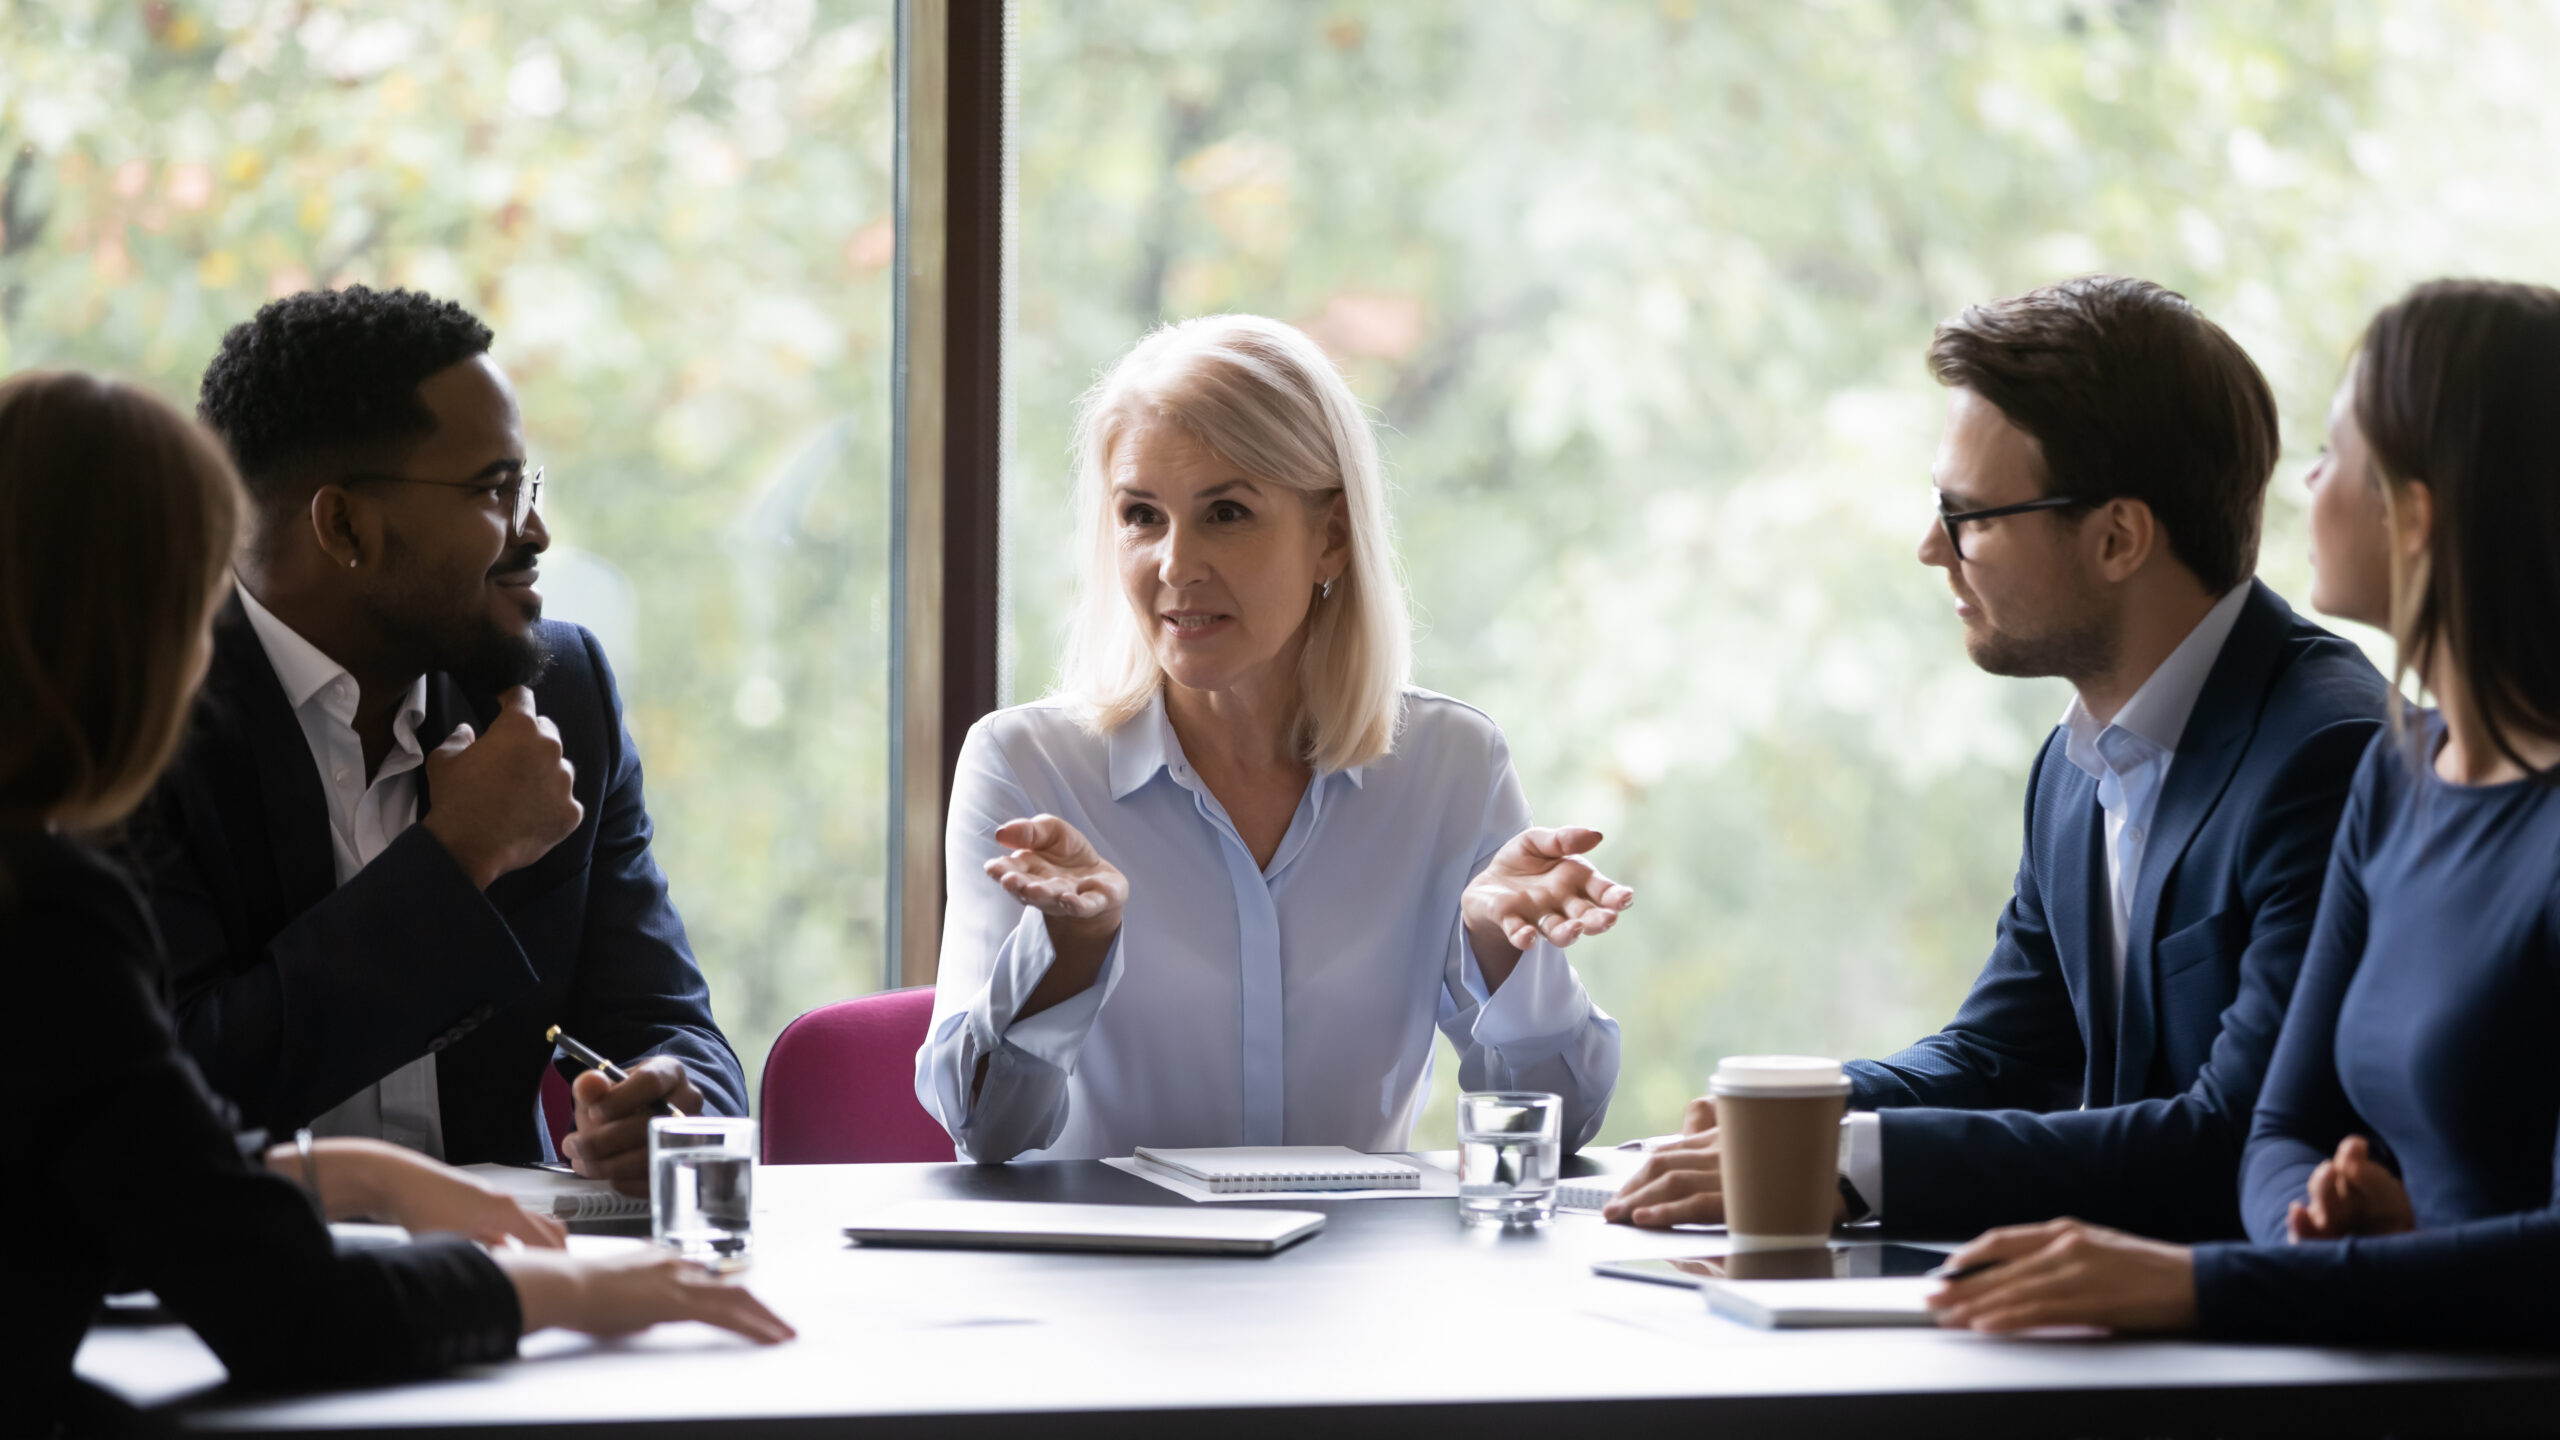 Mature leader boss give helpful information to young diverse professionals